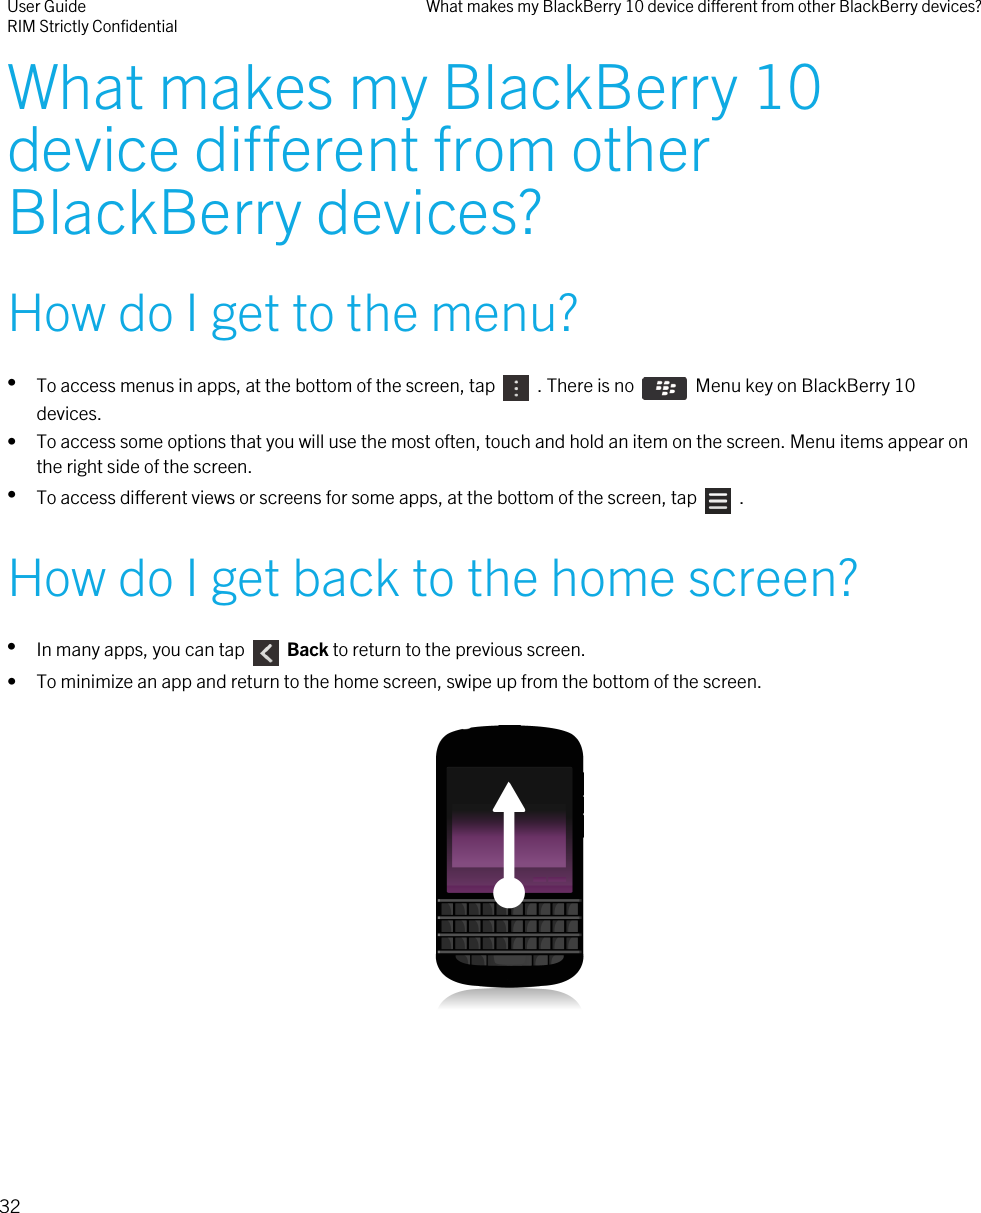 What makes my BlackBerry 10device different from otherBlackBerry devices?How do I get to the menu?•To access menus in apps, at the bottom of the screen, tap    . There is no    Menu key on BlackBerry 10devices.• To access some options that you will use the most often, touch and hold an item on the screen. Menu items appear onthe right side of the screen.•To access different views or screens for some apps, at the bottom of the screen, tap    .How do I get back to the home screen?•In many apps, you can tap    Back to return to the previous screen.• To minimize an app and return to the home screen, swipe up from the bottom of the screen.  User GuideRIM Strictly Confidential What makes my BlackBerry 10 device different from other BlackBerry devices?32